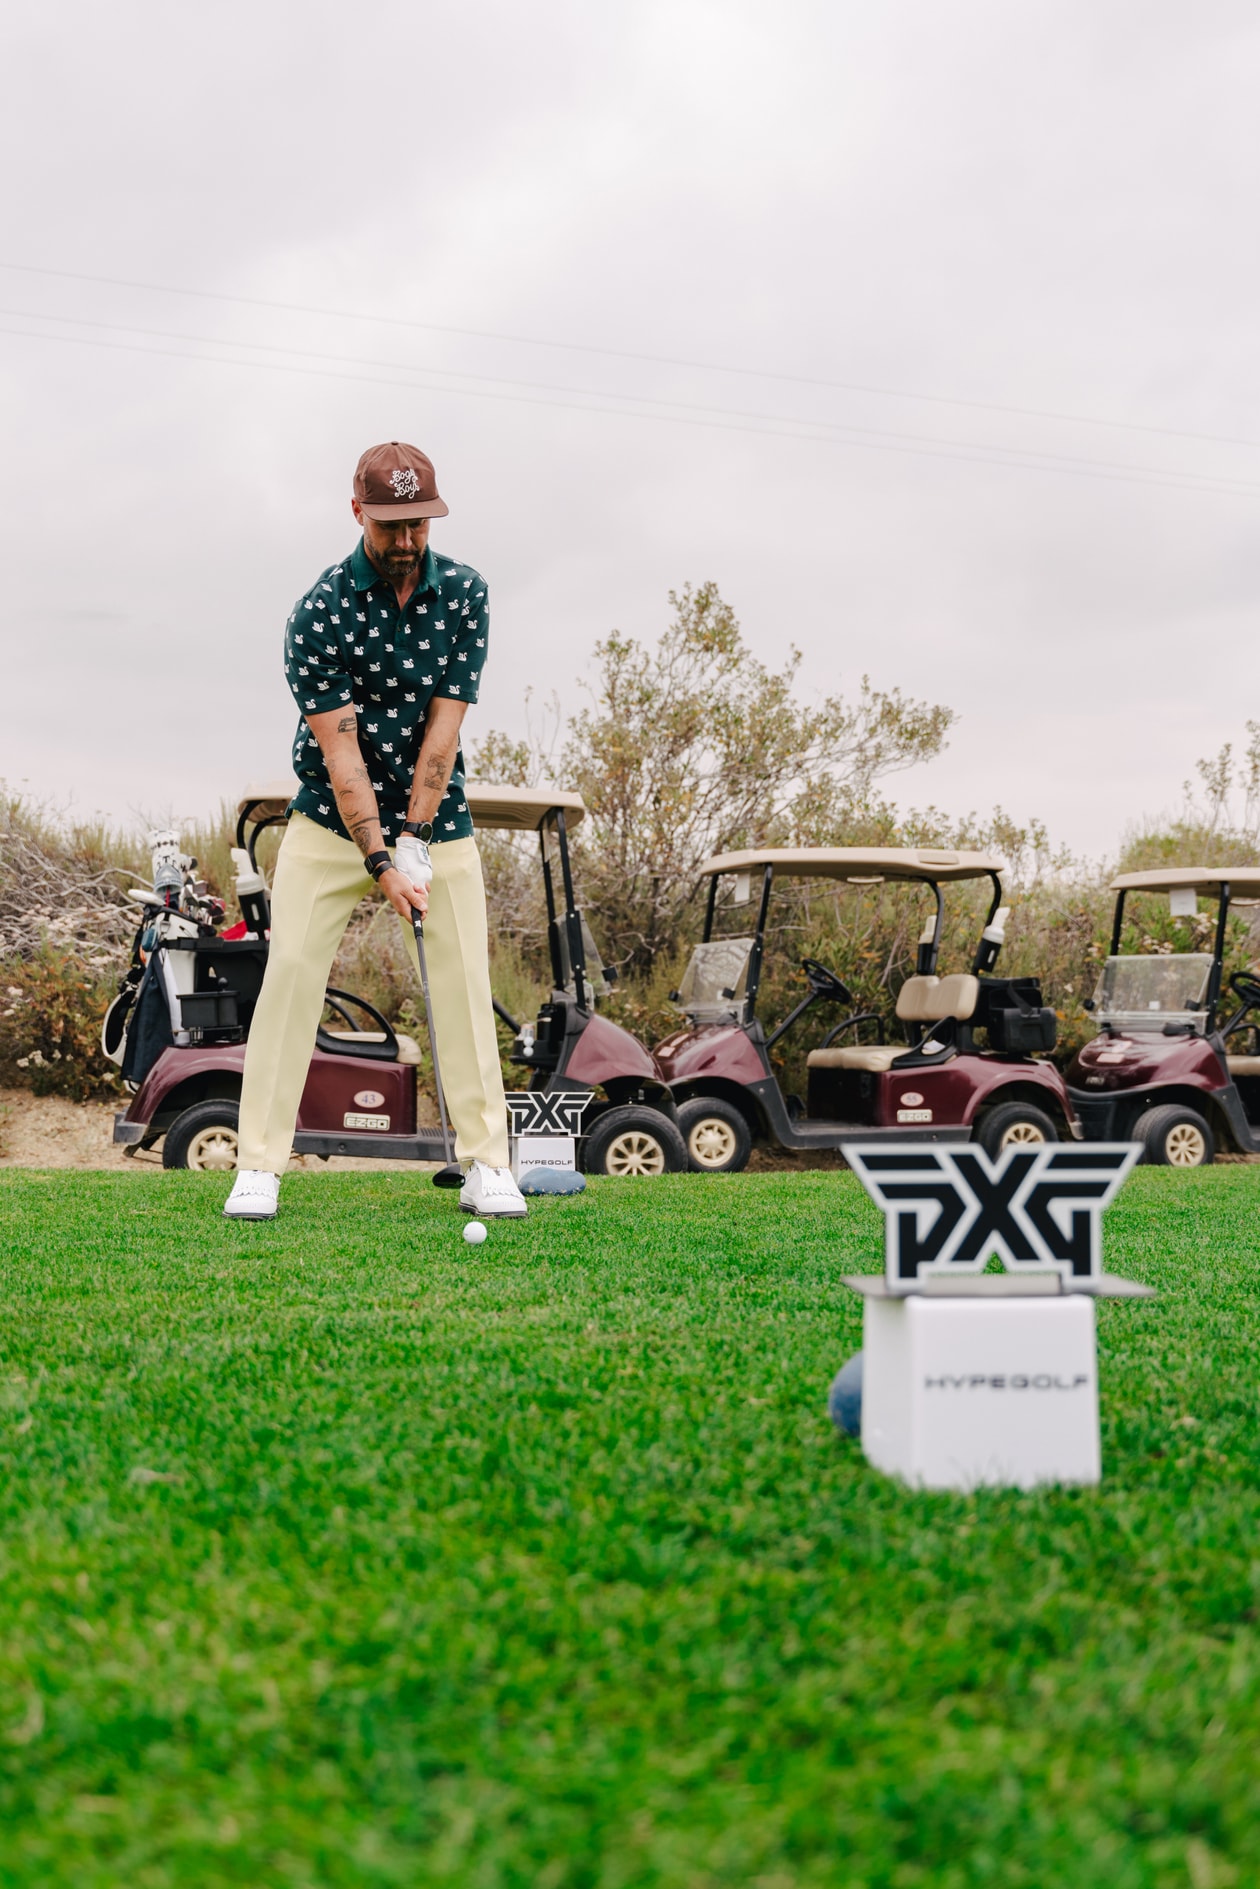 pxg hypegolf invitational gen6 iron series spring summer 2023 apparel collection line all new california activation capsule golf clubs driver fairway hybrid  0311 gen6 0311 xf gen6